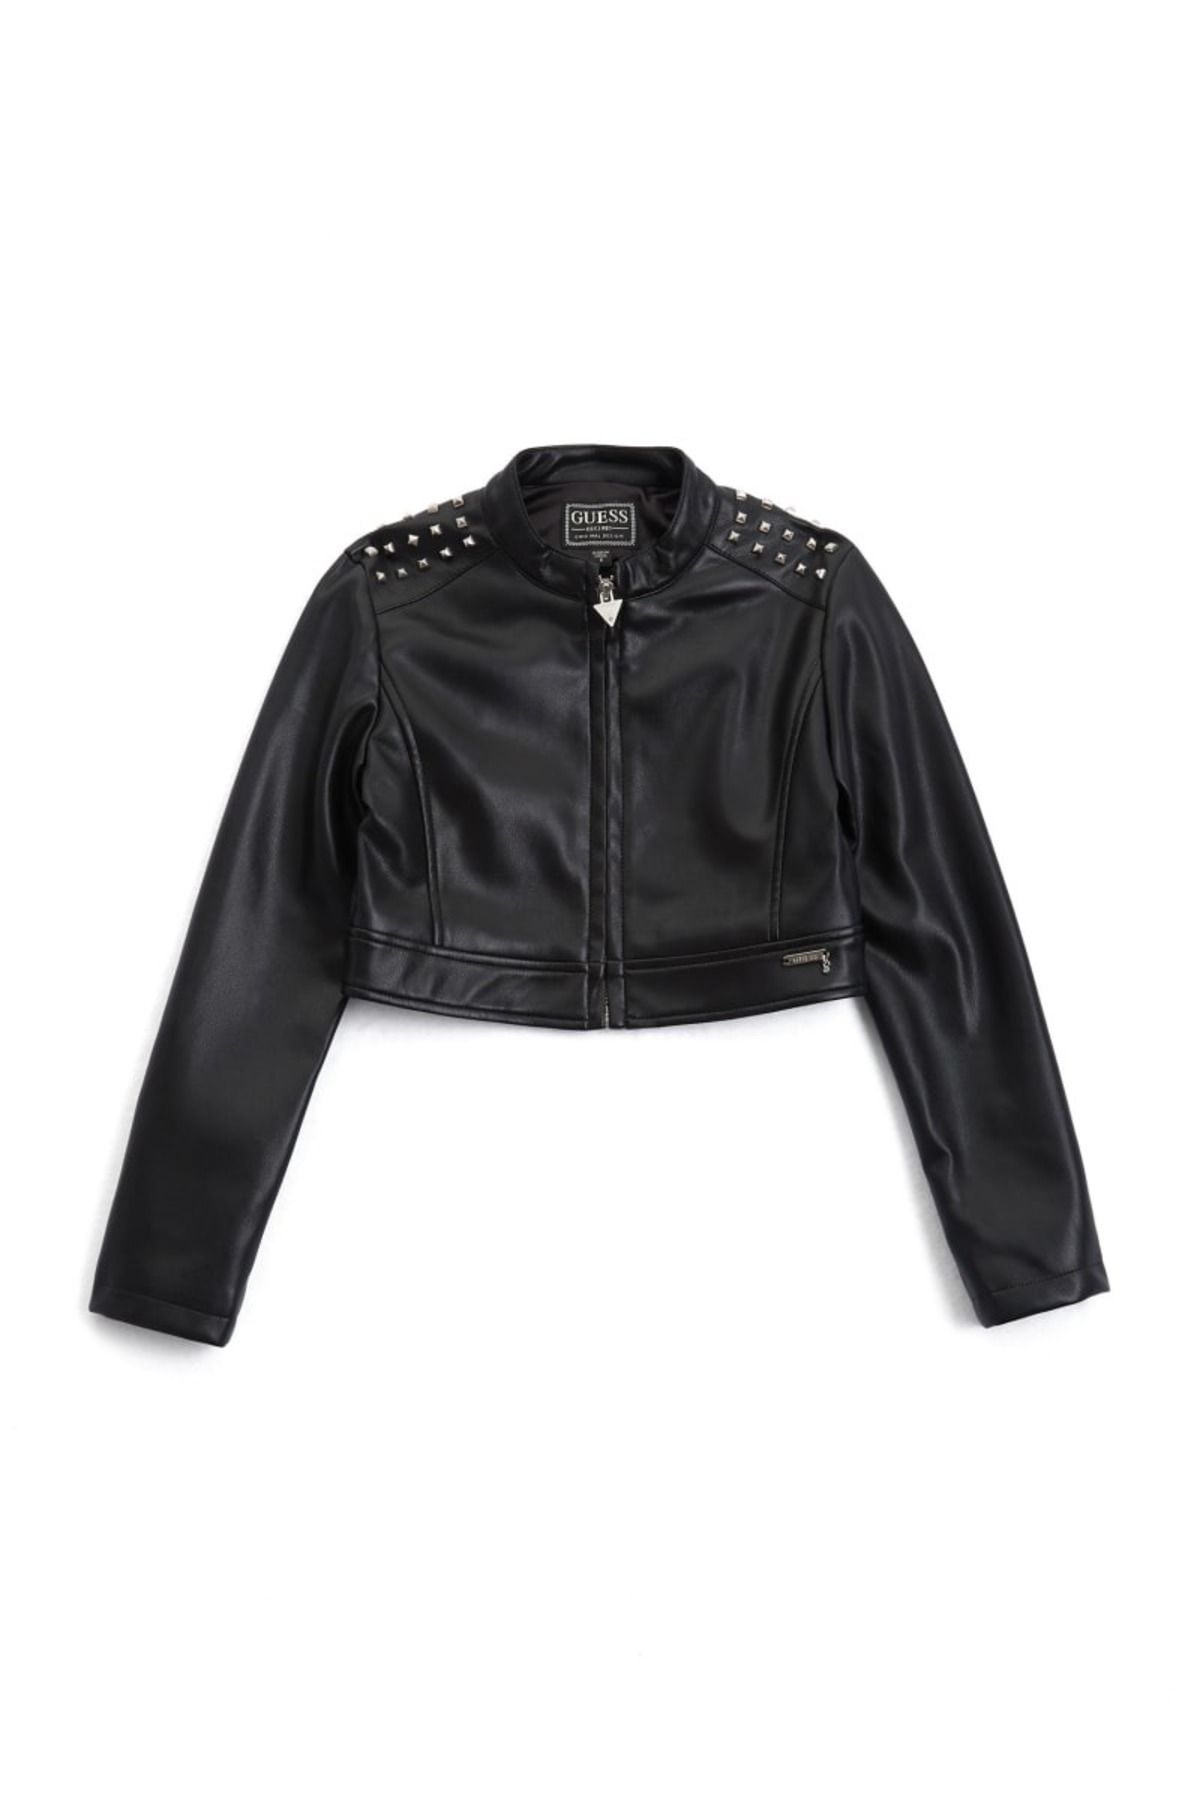 Guess PU LEATHER LS JACKET